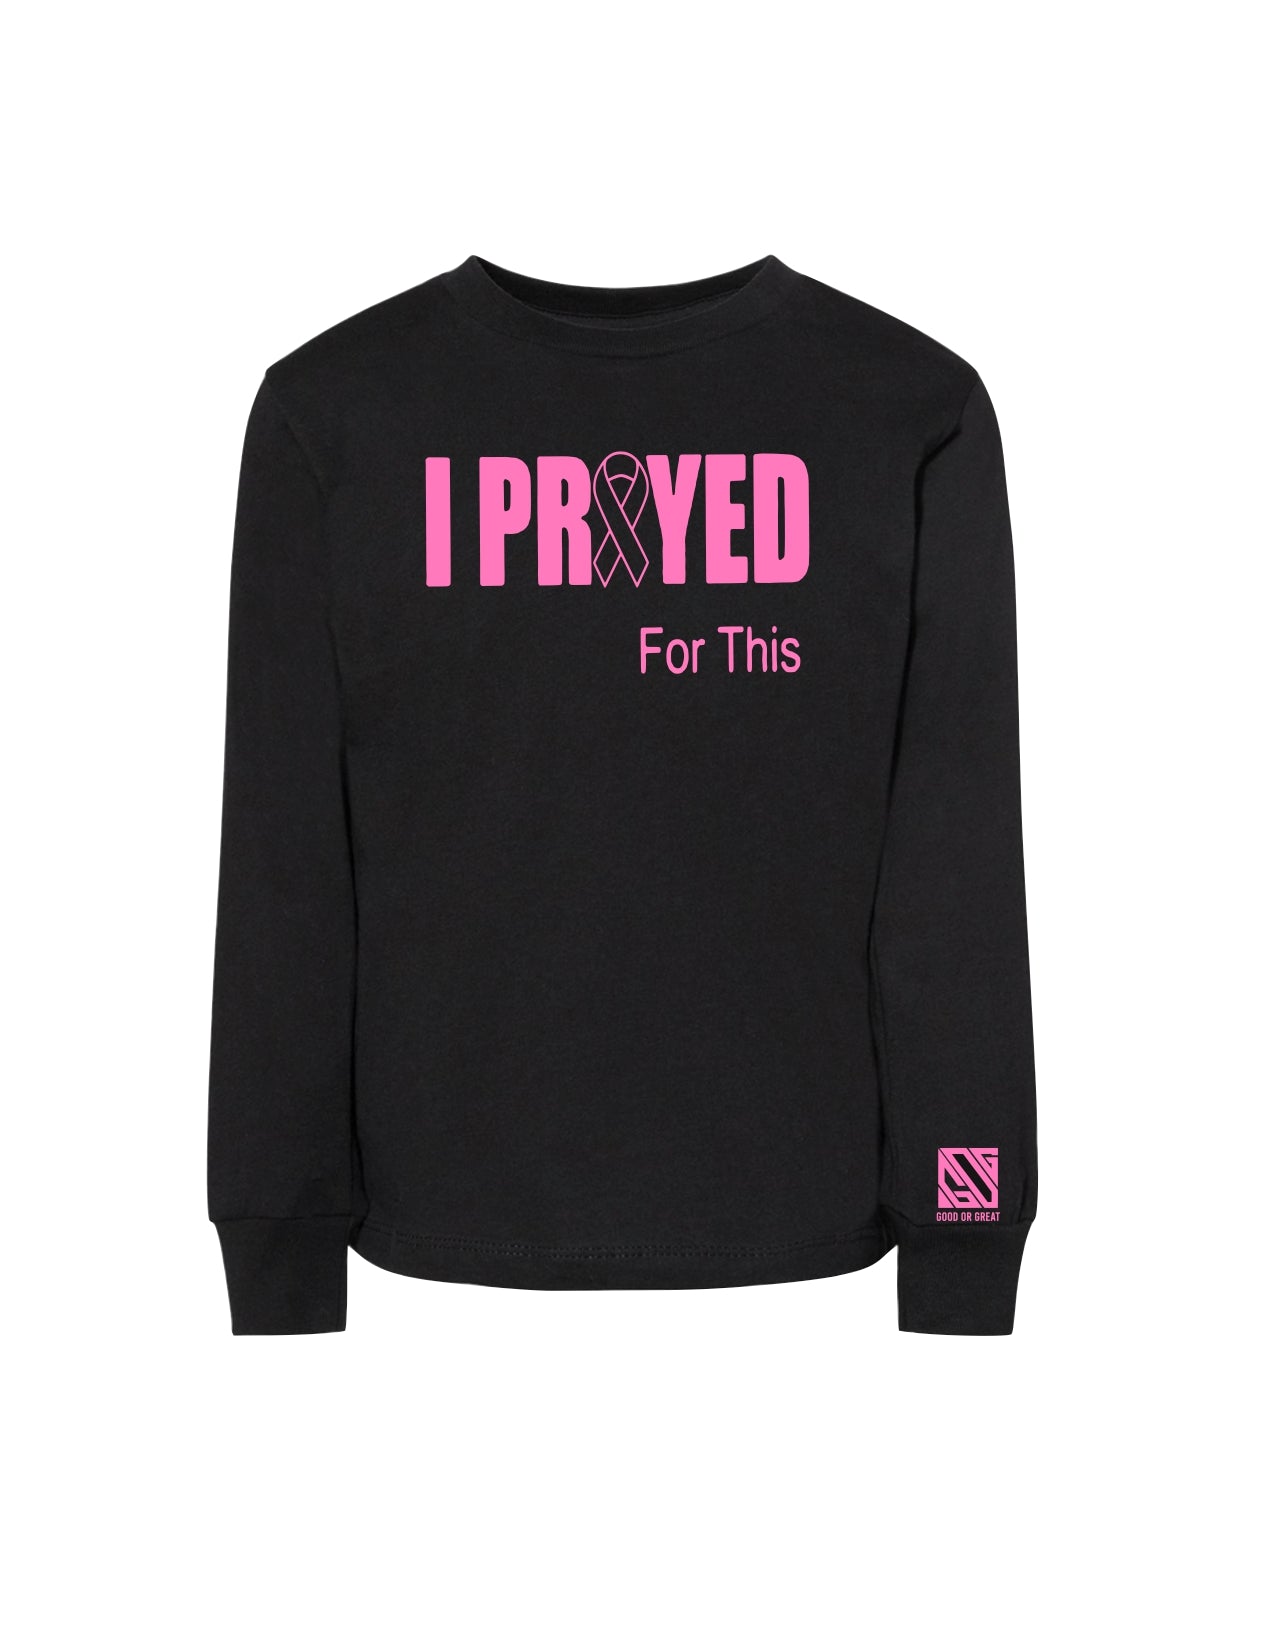 I Prayed For This "Hot Pink BC" Crew Neck